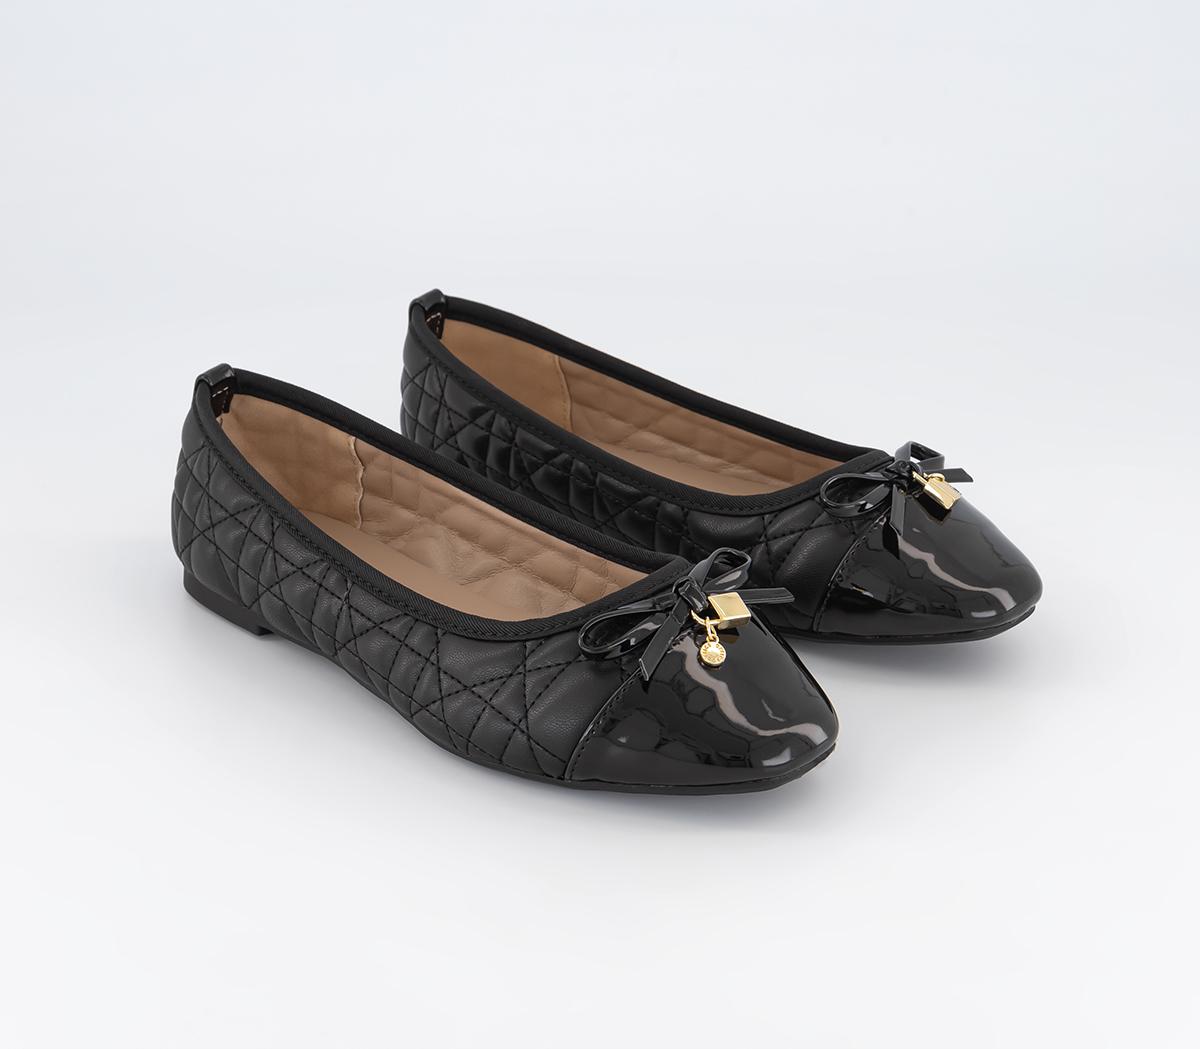 OFFICE Womens Forevermore Charm Ballet Pumps Black, 4